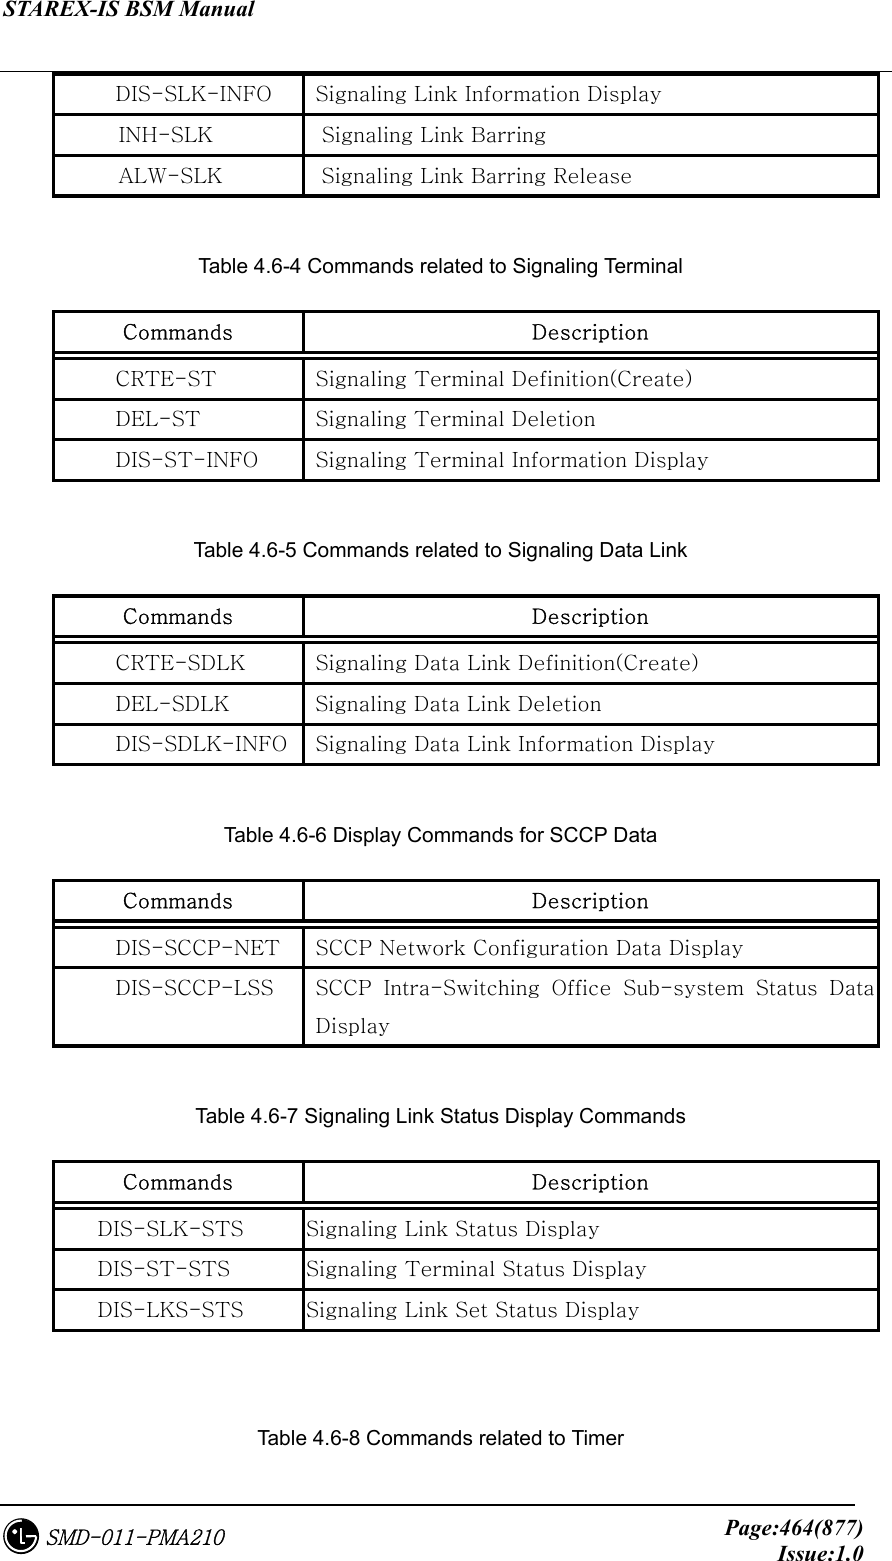 STAREX-IS BSM Manual     Page:464(877)Issue:1.0SMD-011-PMA210 DIS-SLK-INFO  Signaling Link Information Display INH-SLK  Signaling Link Barring ALW-SLK  Signaling Link Barring Release  Table 4.6-4 Commands related to Signaling Terminal Commands    Description CRTE-ST  Signaling Terminal Definition(Create) DEL-ST  Signaling Terminal Deletion DIS-ST-INFO  Signaling Terminal Information Display  Table 4.6-5 Commands related to Signaling Data Link Commands    Description CRTE-SDLK  Signaling Data Link Definition(Create) DEL-SDLK  Signaling Data Link Deletion DIS-SDLK-INFO  Signaling Data Link Information Display  Table 4.6-6 Display Commands for SCCP Data Commands    Description DIS-SCCP-NET  SCCP Network Configuration Data Display DIS-SCCP-LSS  SCCP  Intra-Switching  Office  Sub-system  Status  Data Display  Table 4.6-7 Signaling Link Status Display Commands Commands    Description DIS-SLK-STS  Signaling Link Status Display DIS-ST-STS  Signaling Terminal Status Display DIS-LKS-STS  Signaling Link Set Status Display   Table 4.6-8 Commands related to Timer 